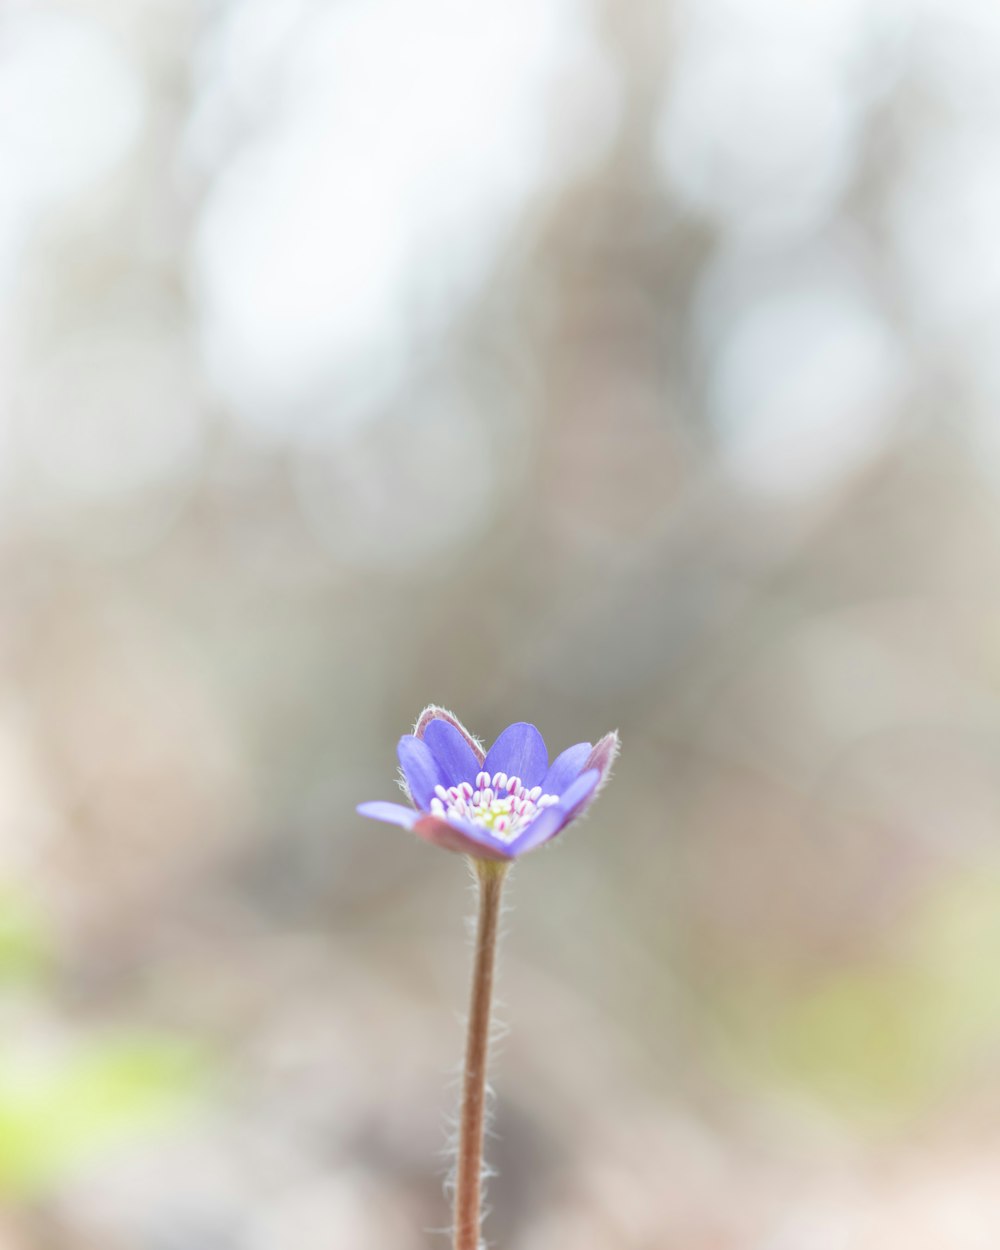 a small purple flower with a blurry background